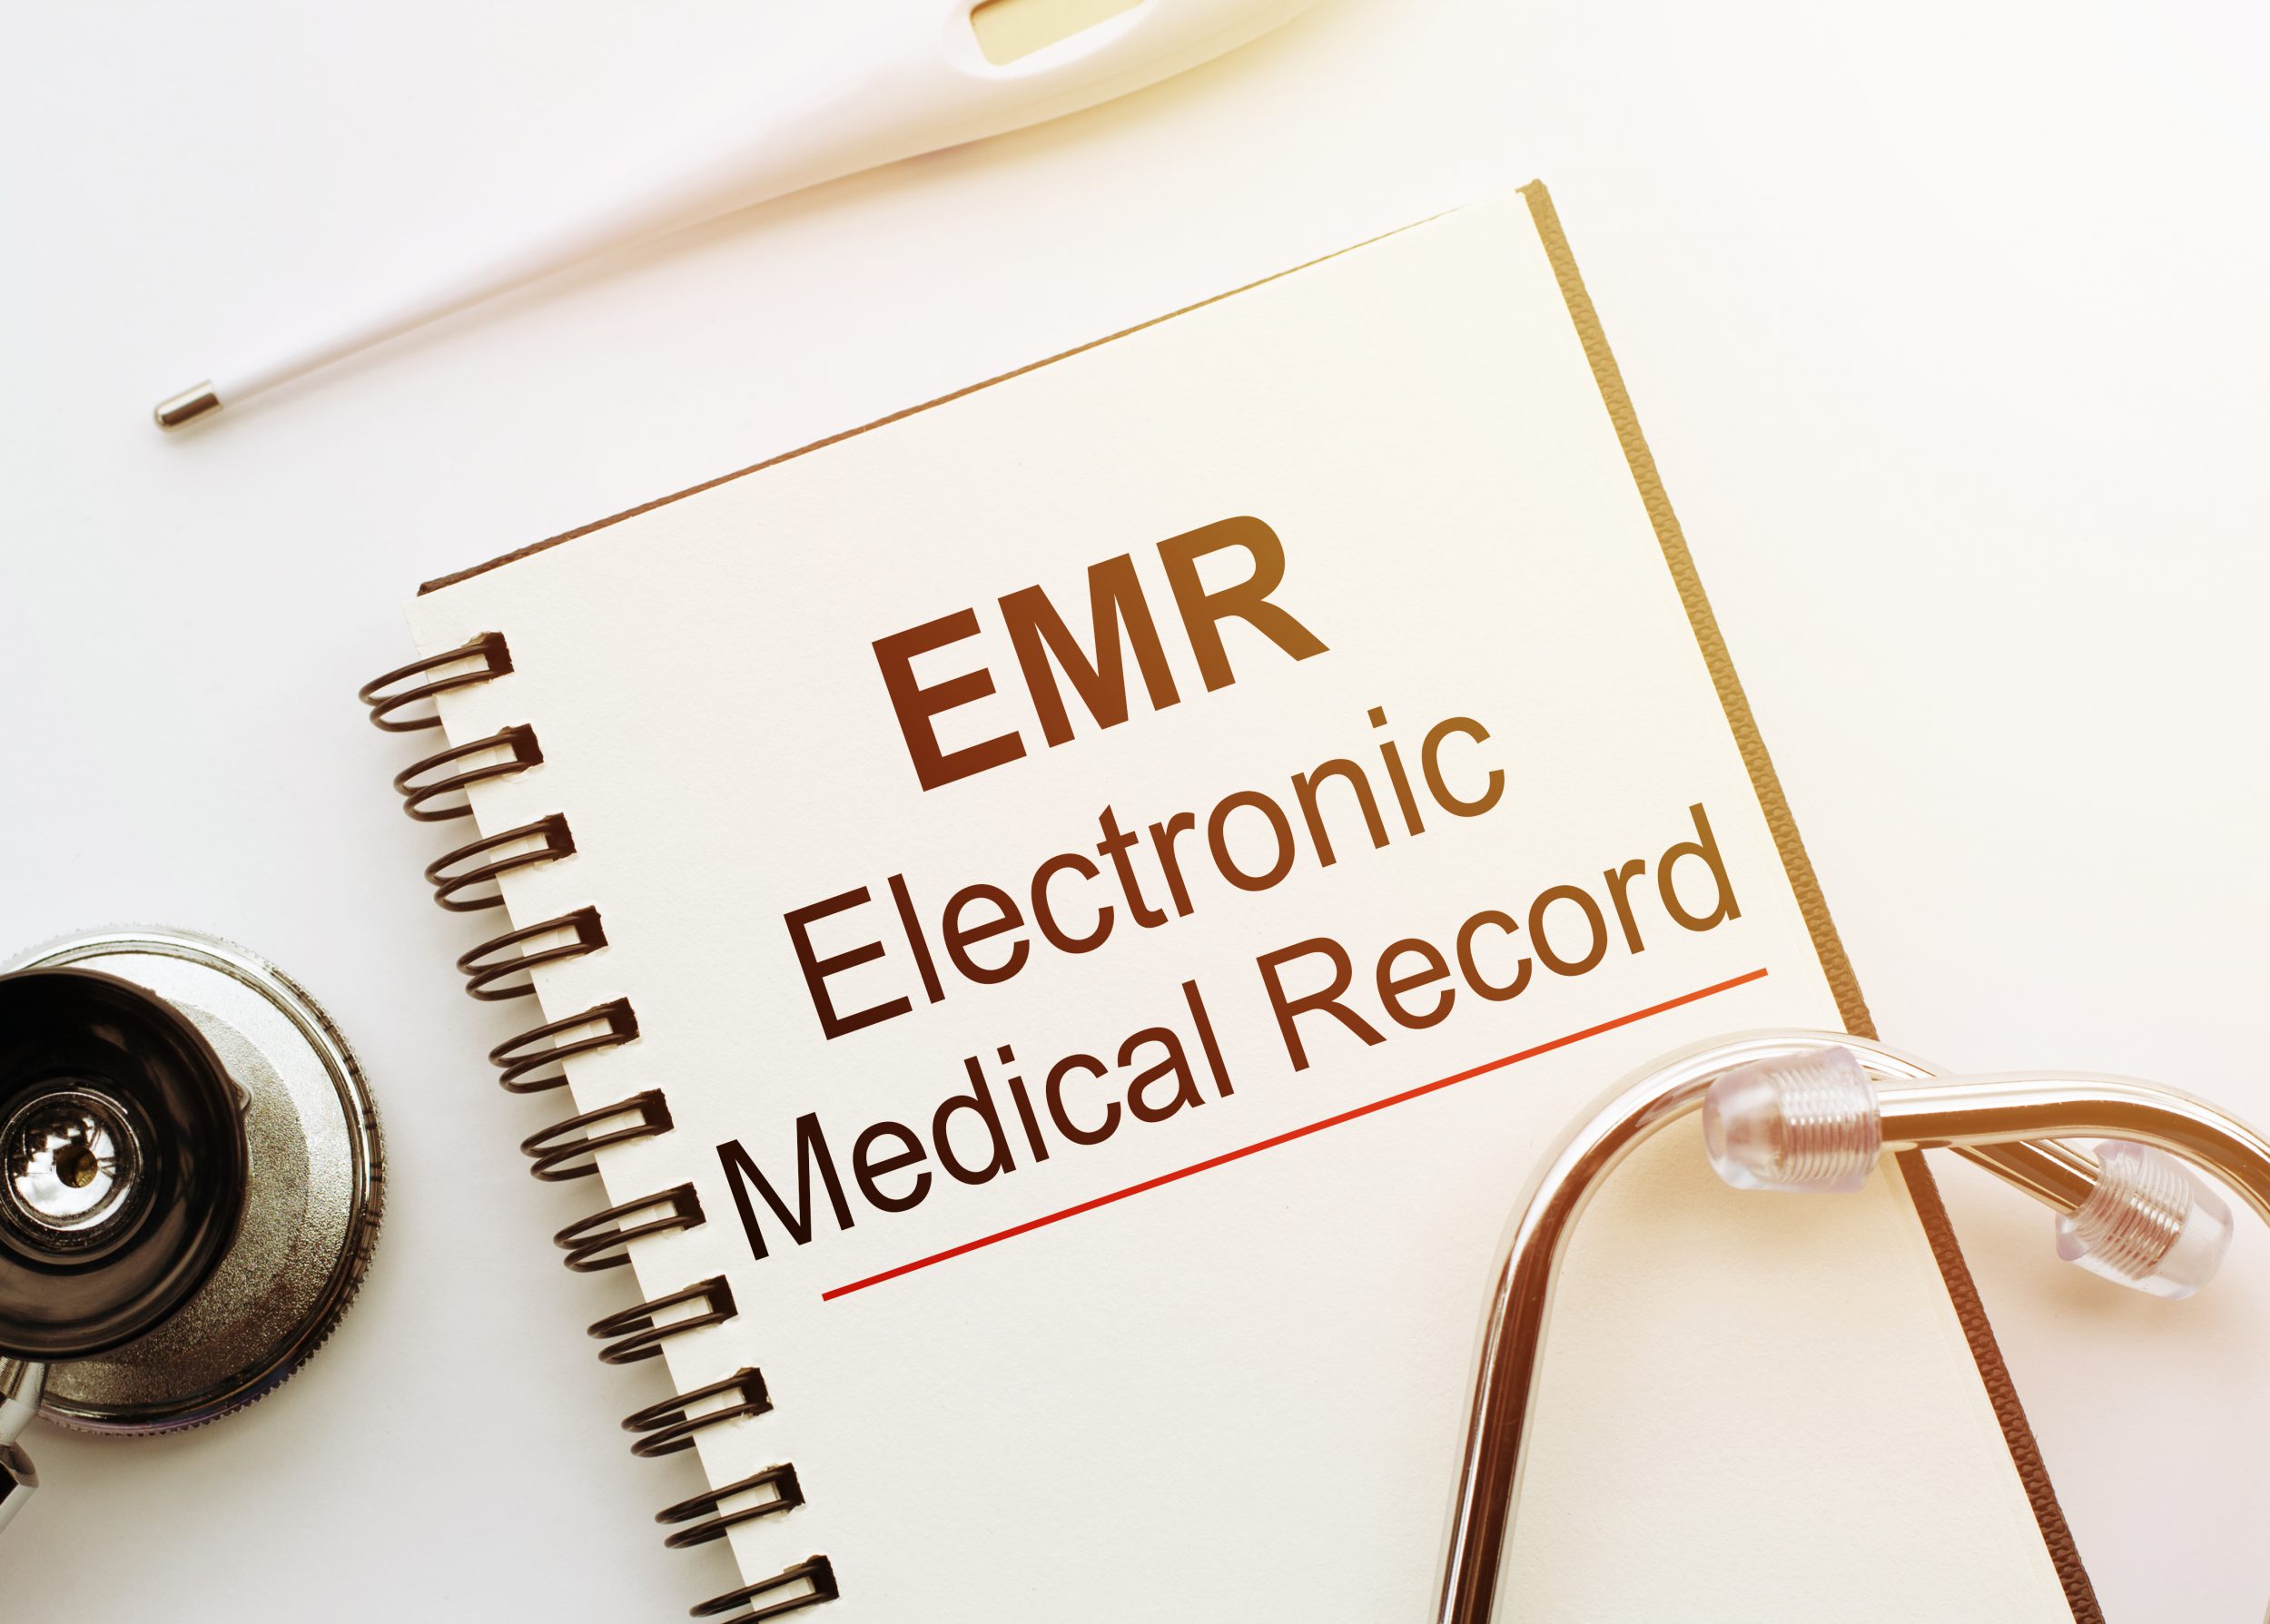 Blank with EMR or electronic medical record text from EMR systems on table